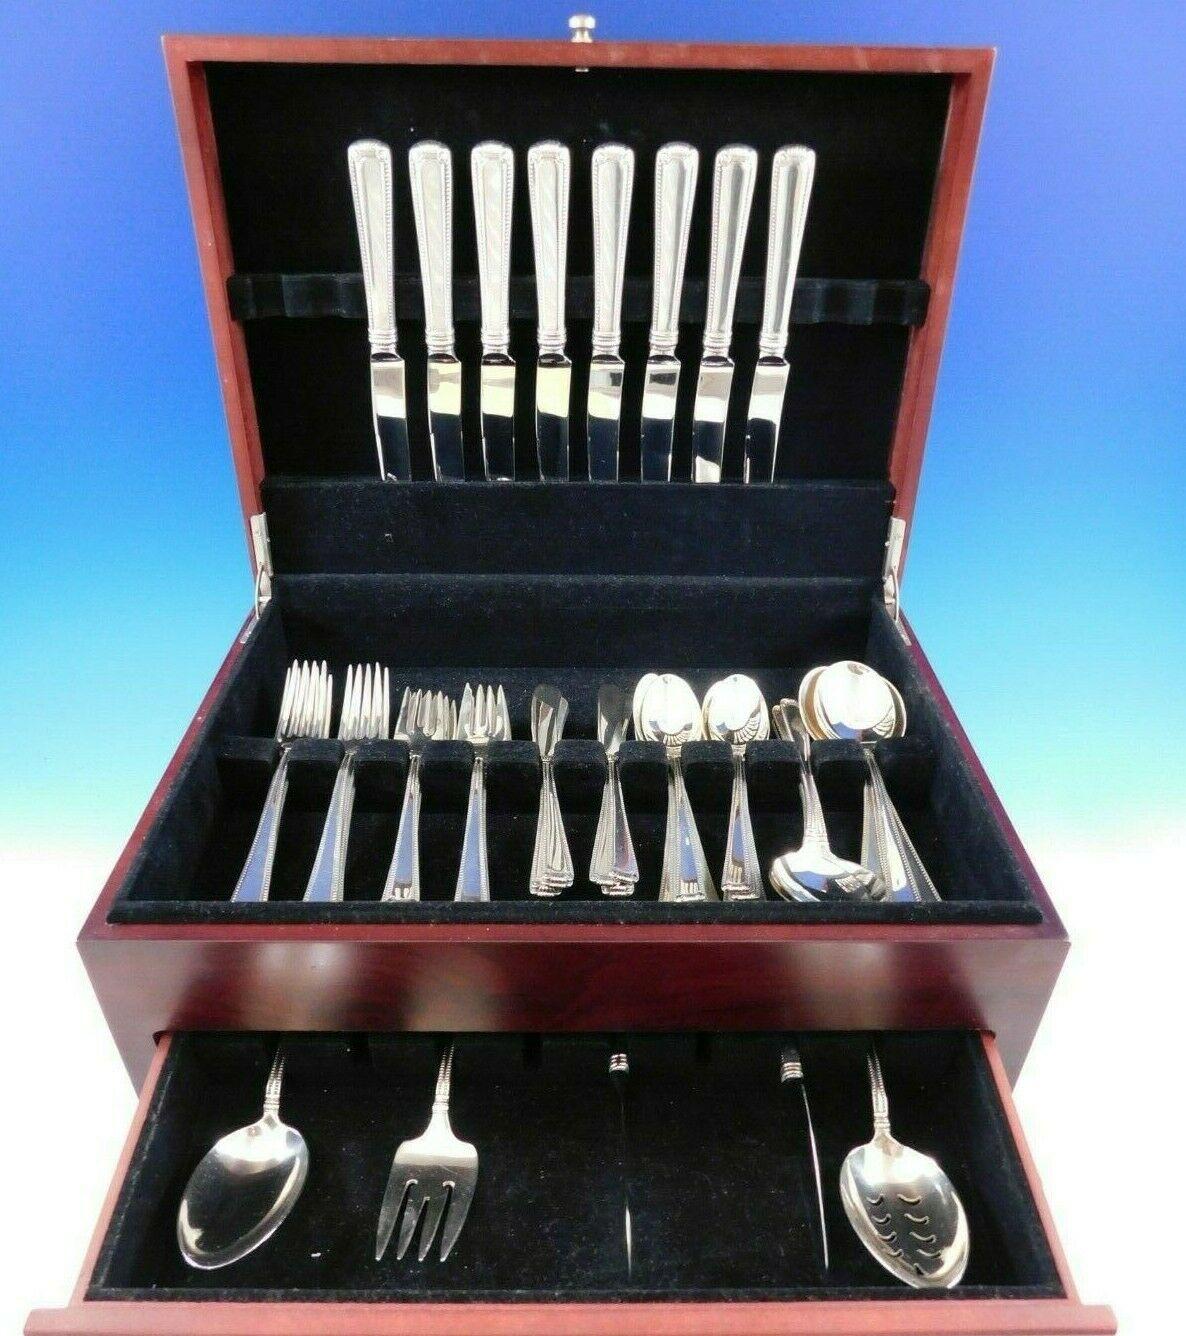 Beautiful Scroll and Bead by Blackinton Sterling Silver Flatware set with beaded design - 53 pieces. This set includes:

8 Knives, 8 7/8